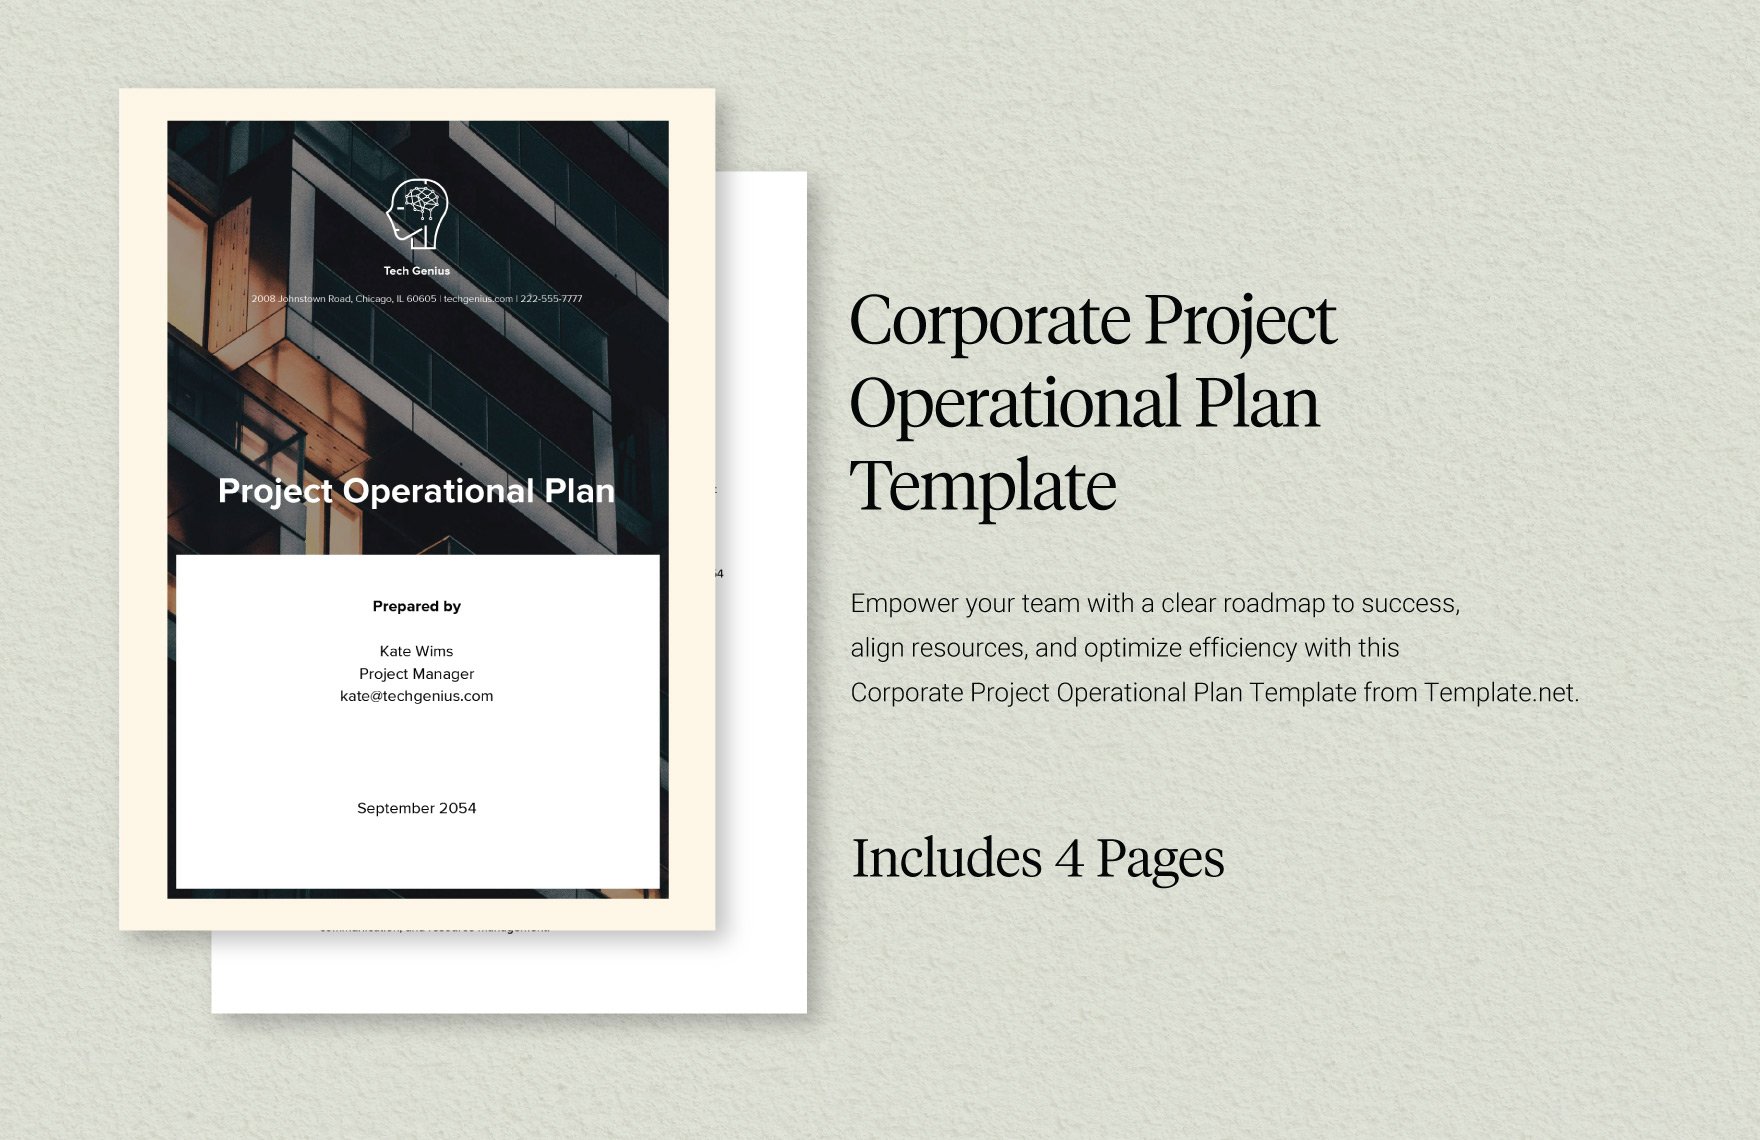 Corporate Project Operational Plan Template in Word, Google Docs, PDF